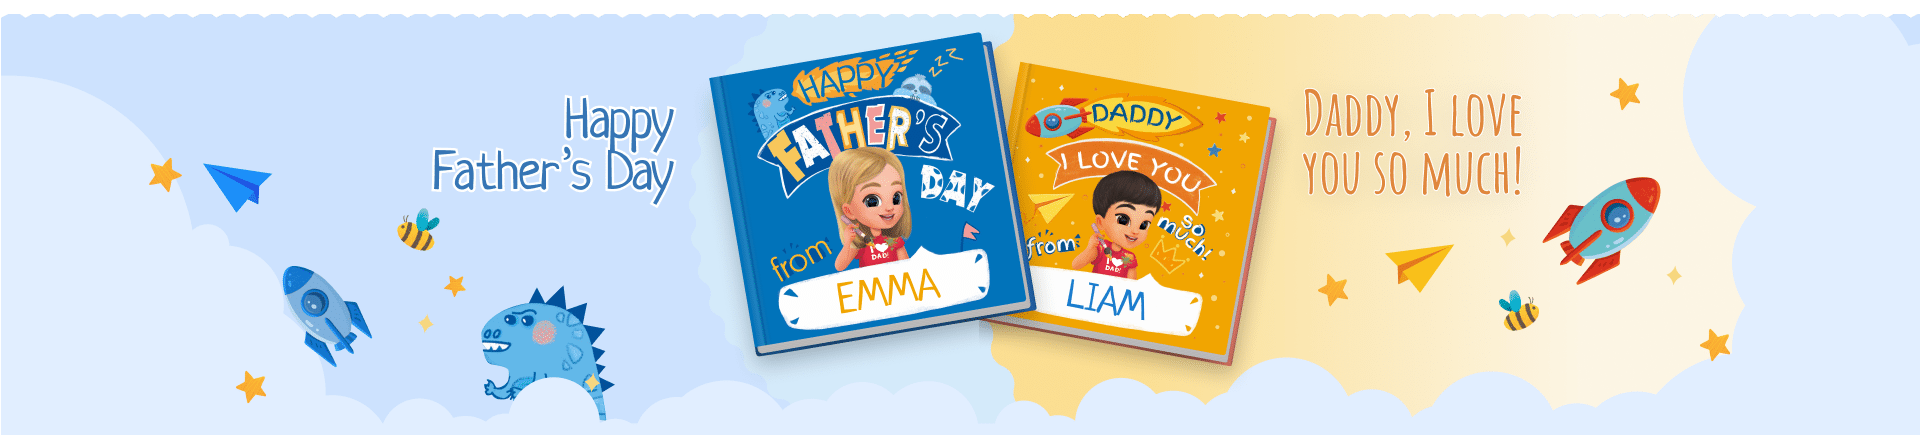 Happy Father's Day book in our new Storybook!